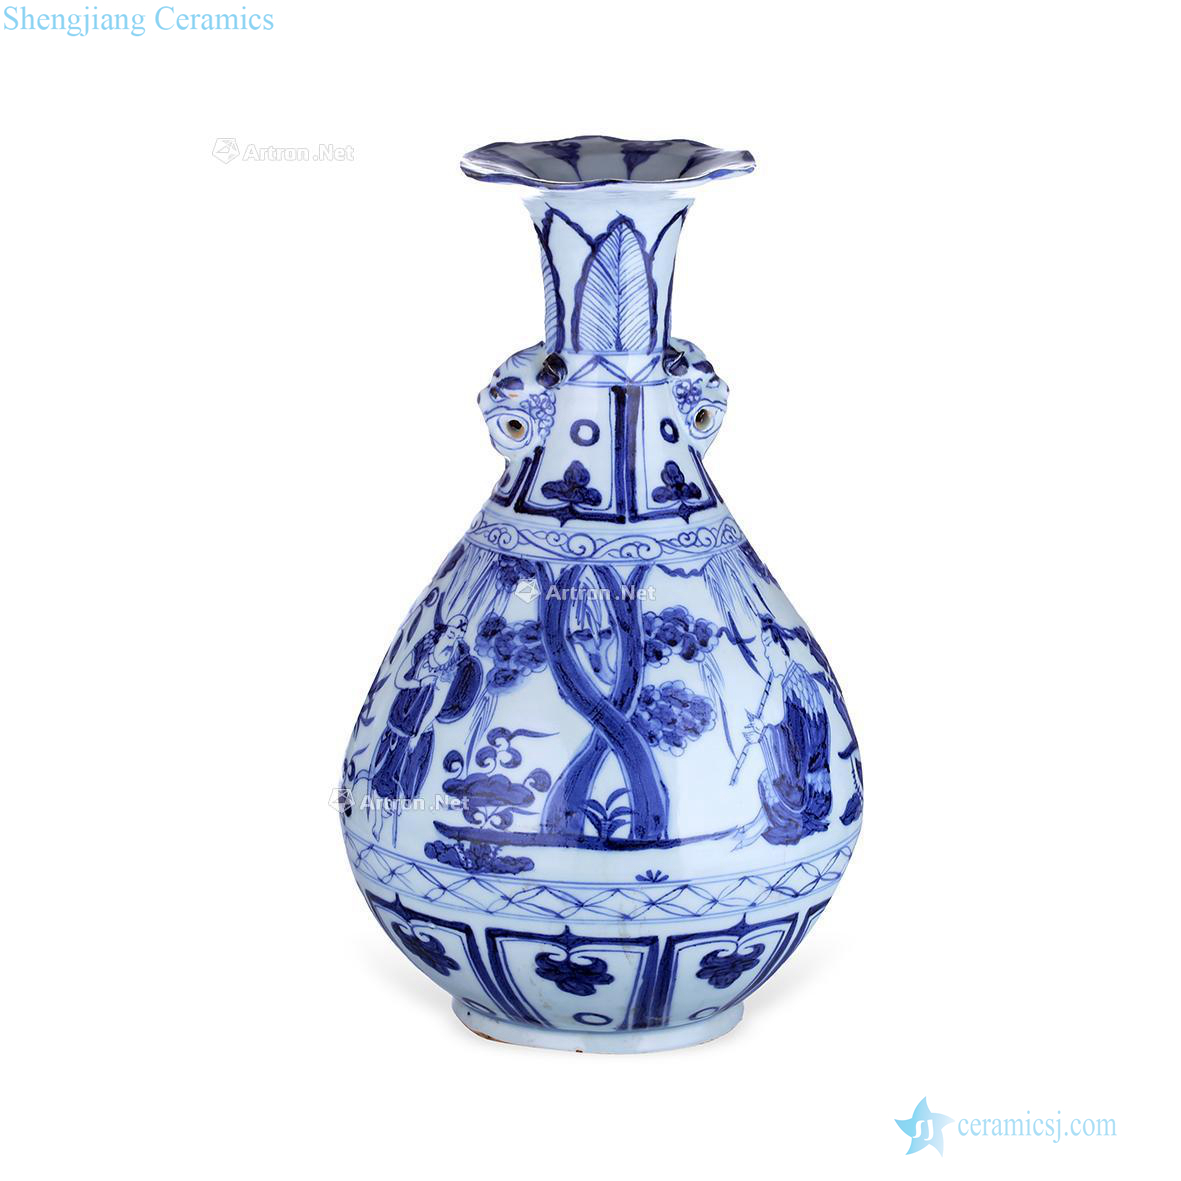 Yuan later Stories of blue and white lines double beast ear okho spring bottle